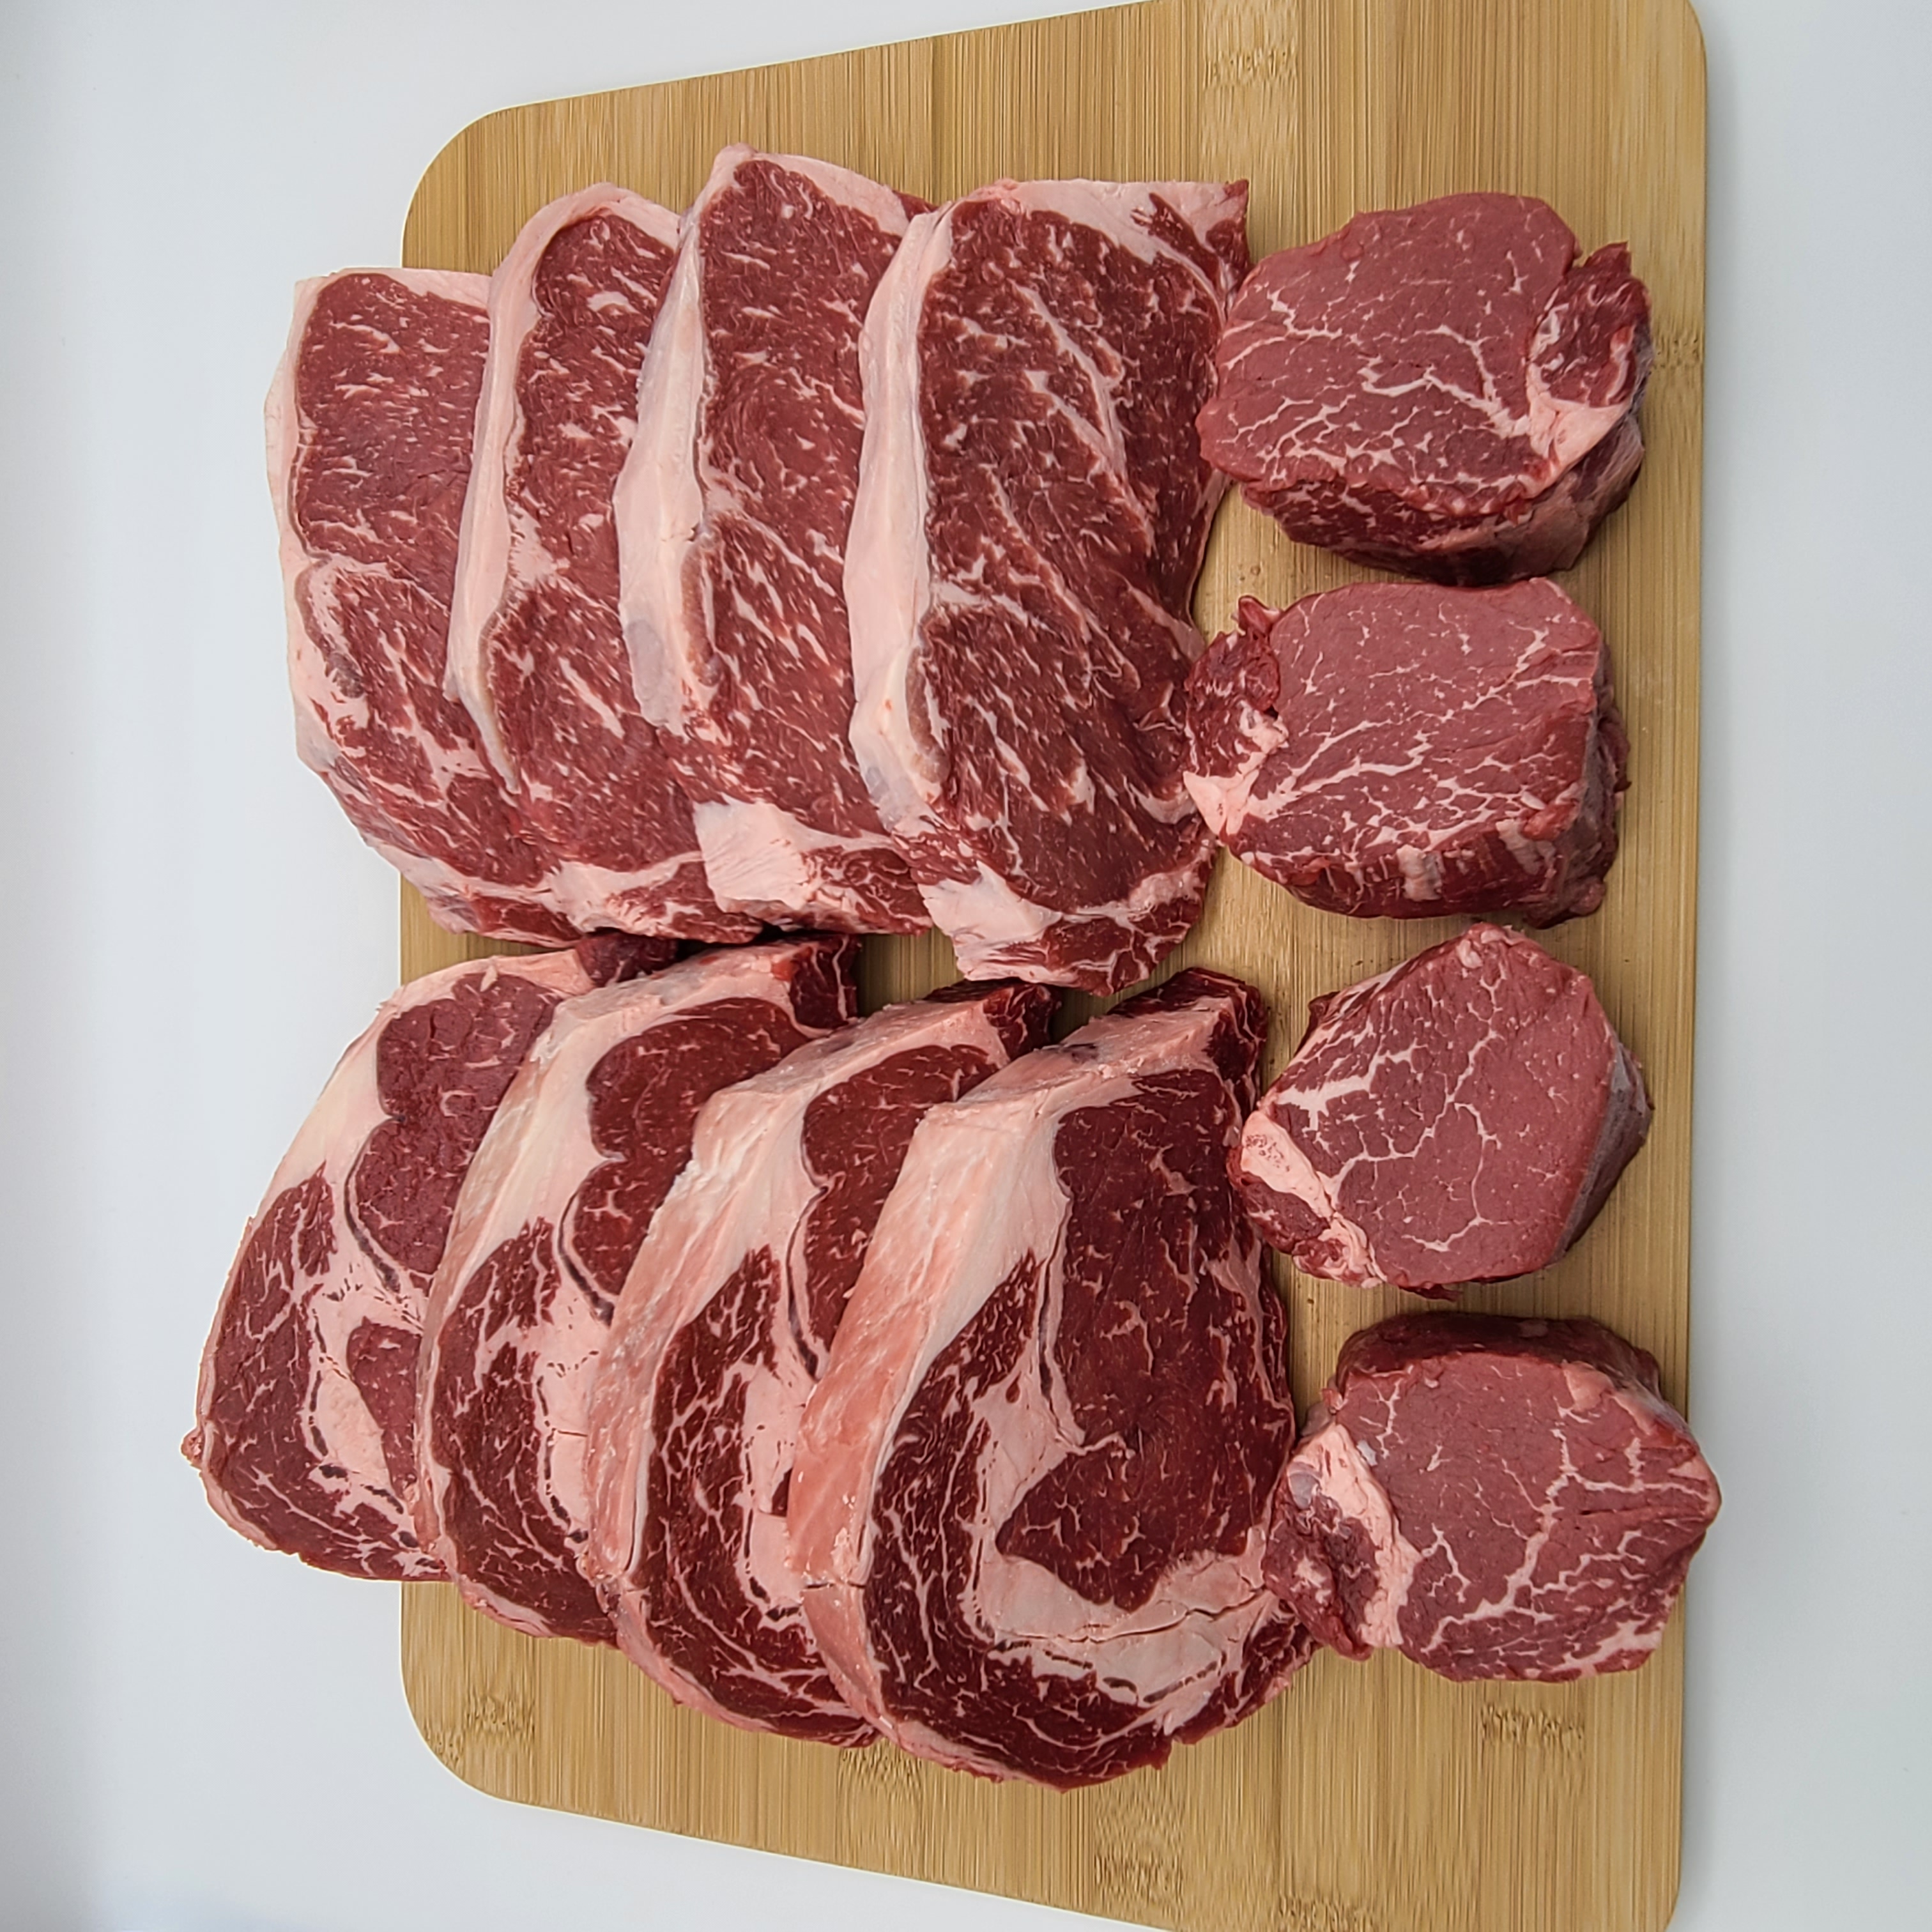 Country Village Meats Holiday Meat Bundle